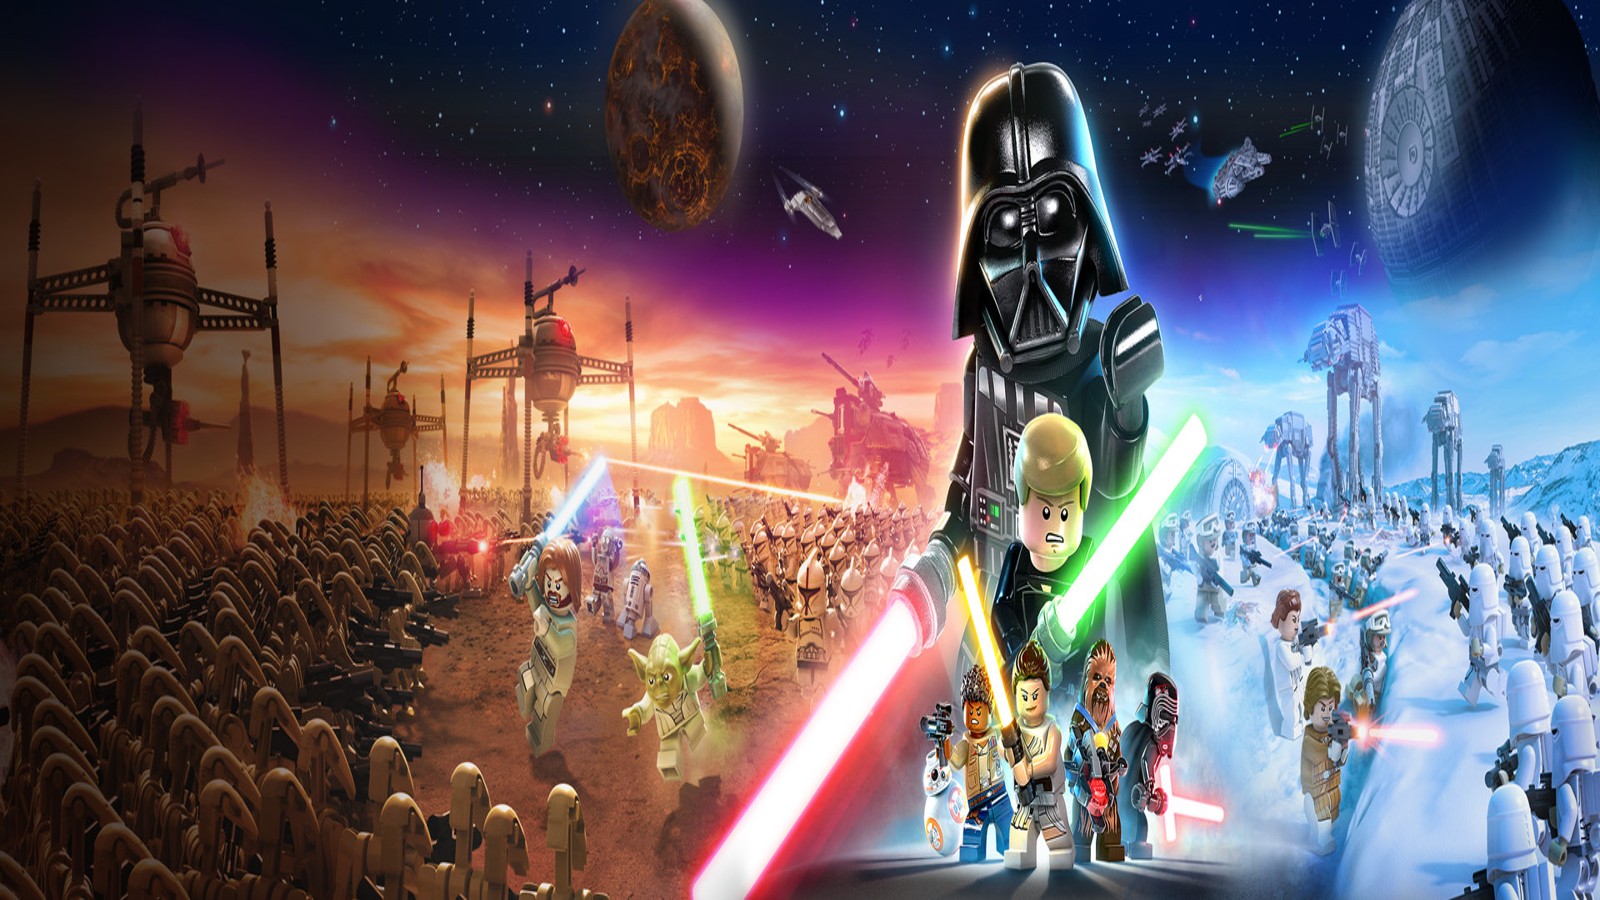 LEGO Star Wars The Skywalker Saga Review Scores - Is it Worth it?